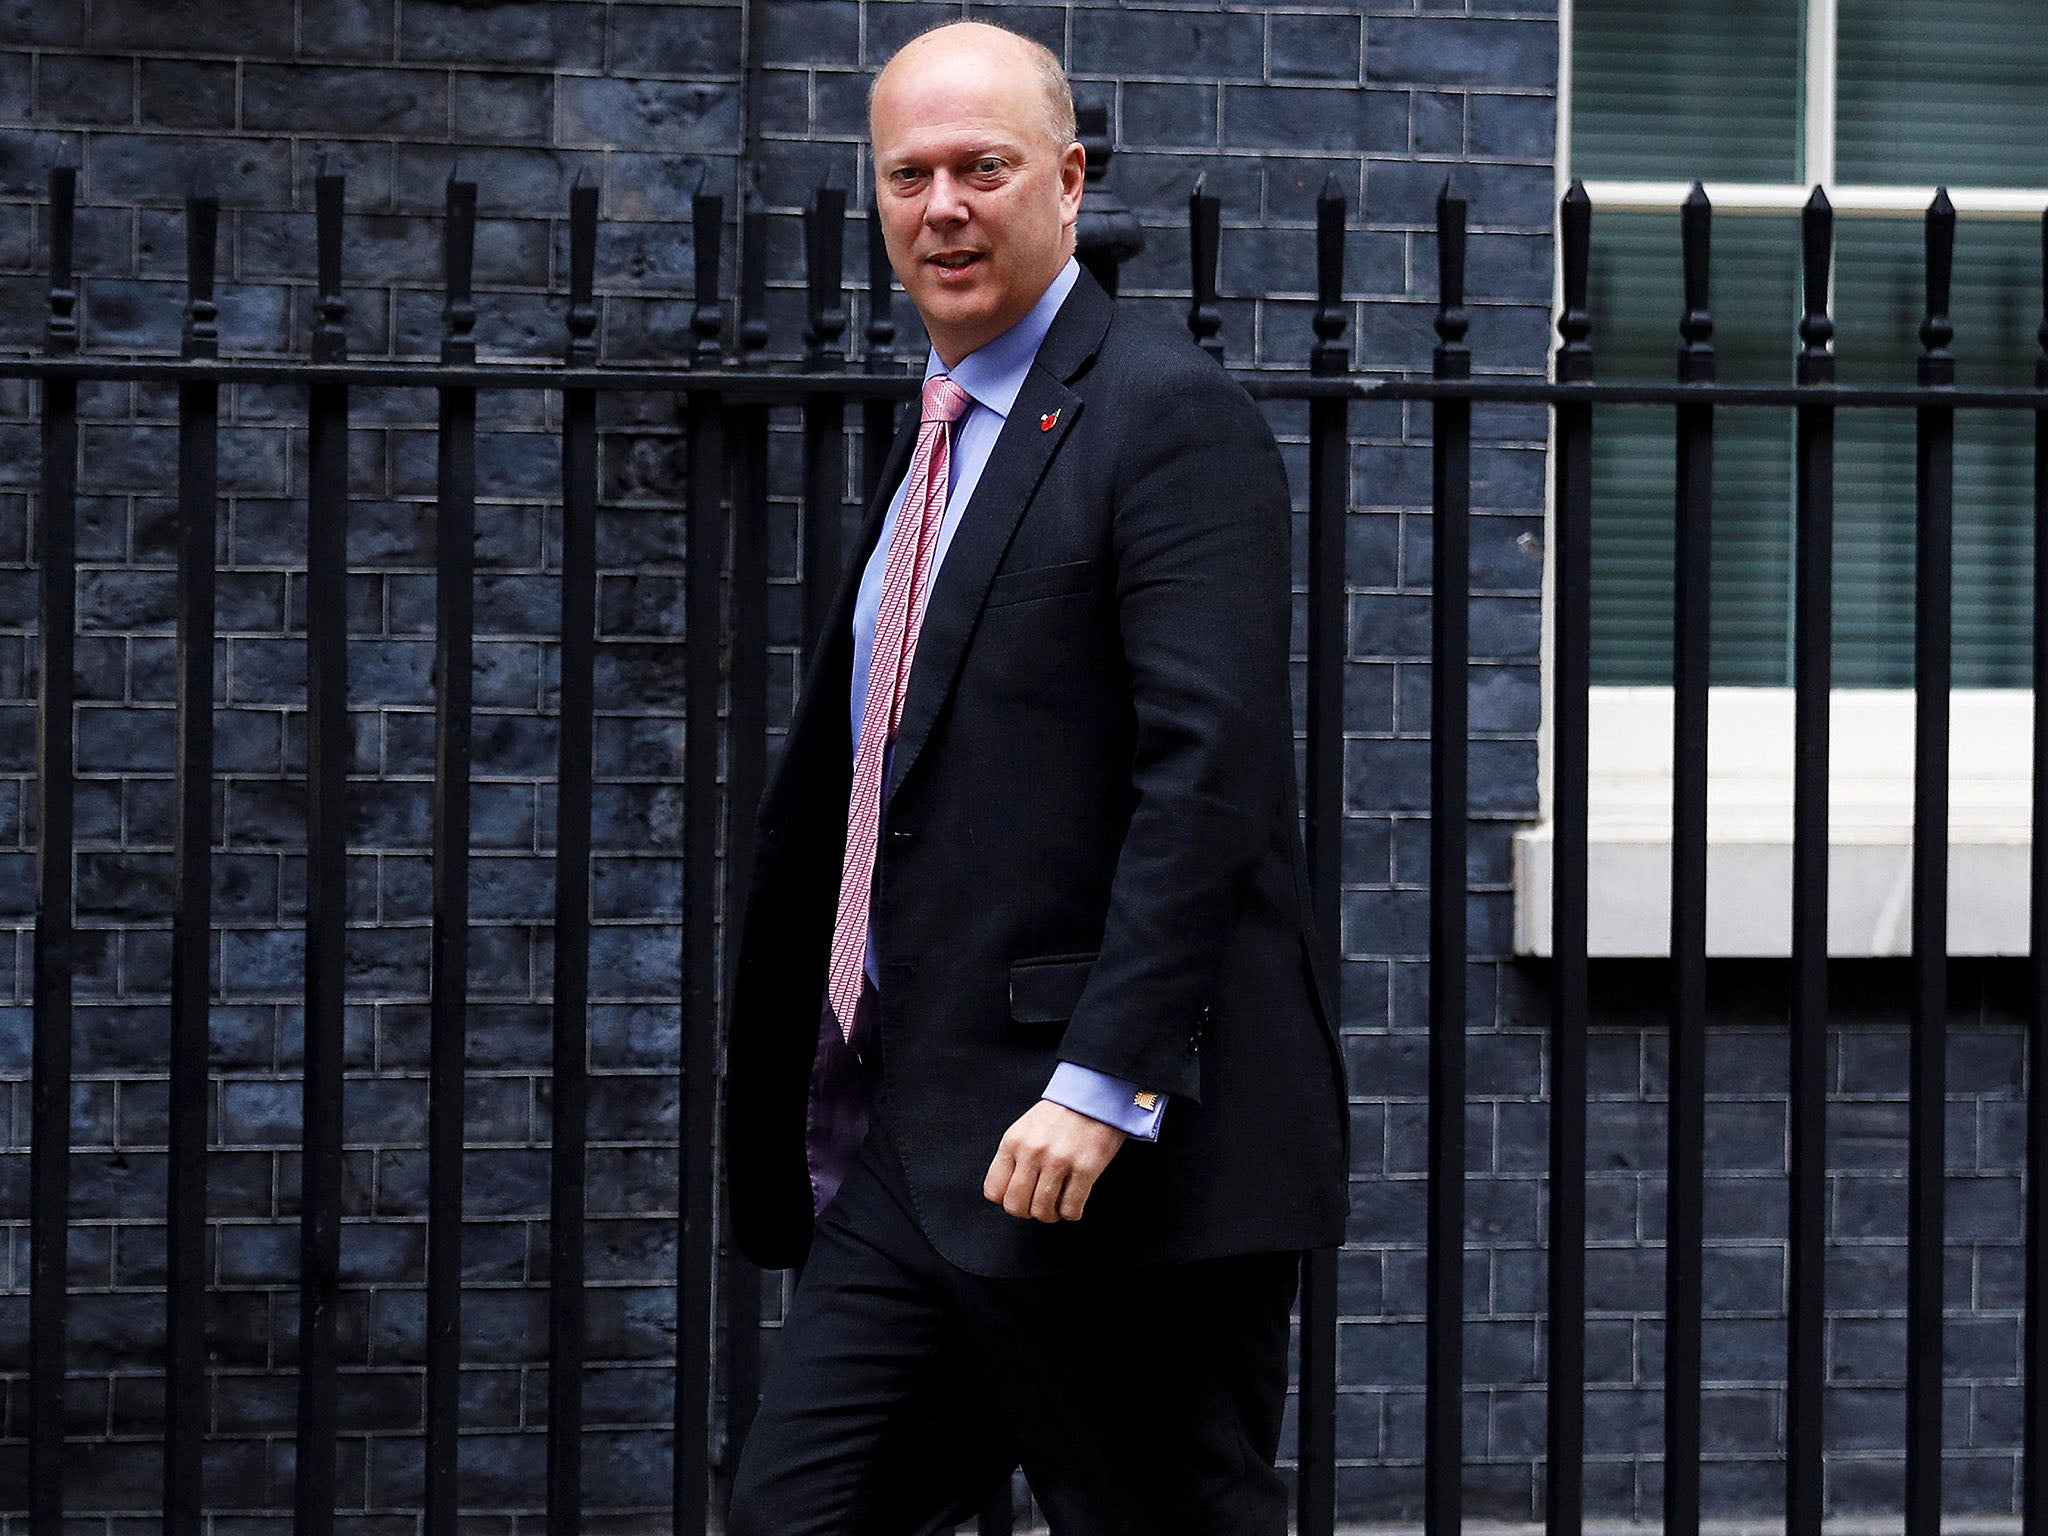 Chris Grayling has faced criticism over his handling of timetable disruption on Northern Rail and the Govia Thameslink Railway